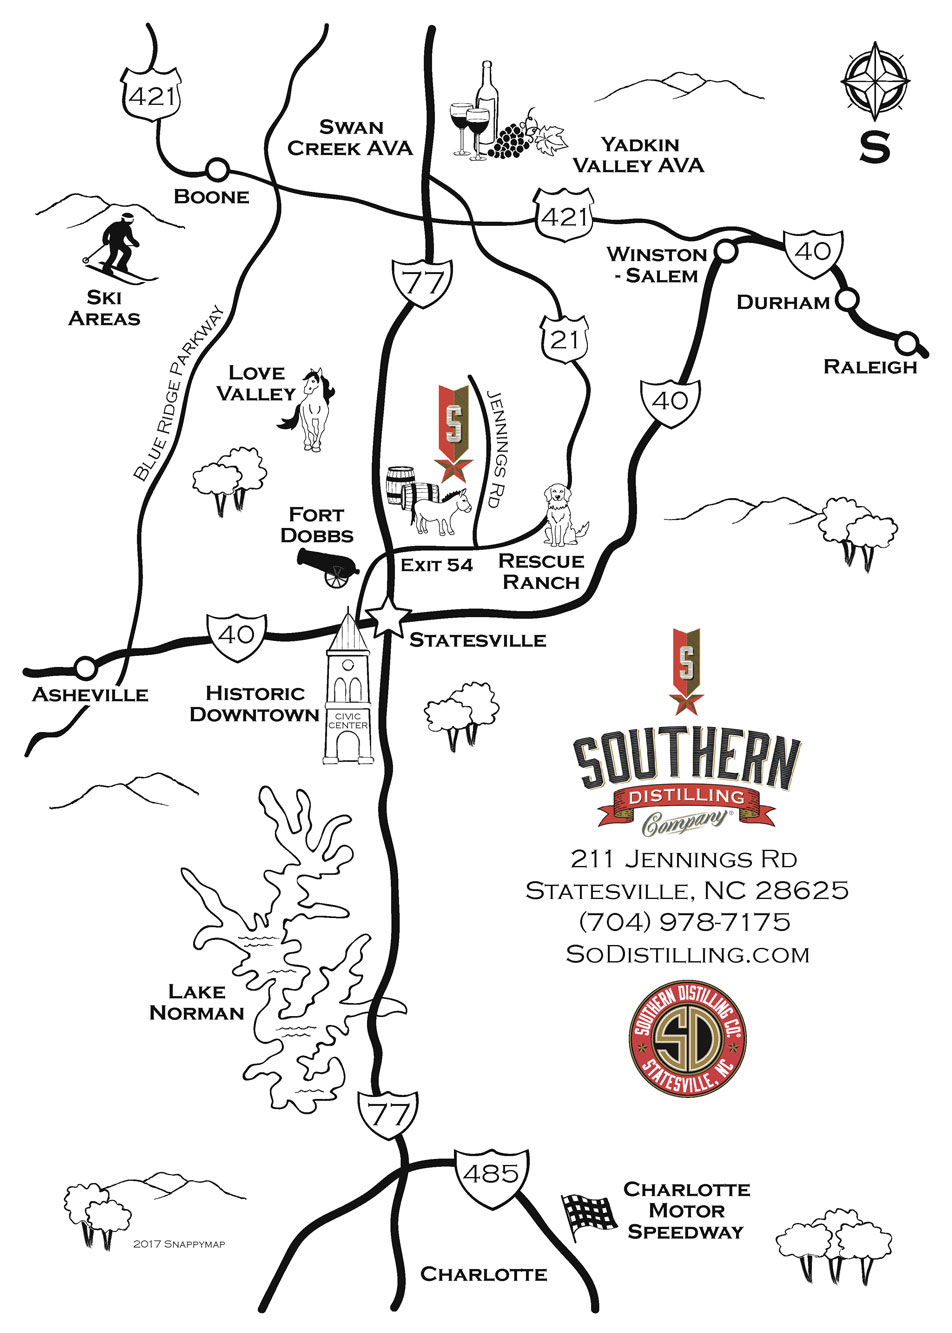 Southern Distilling Company - Map to the Distillery